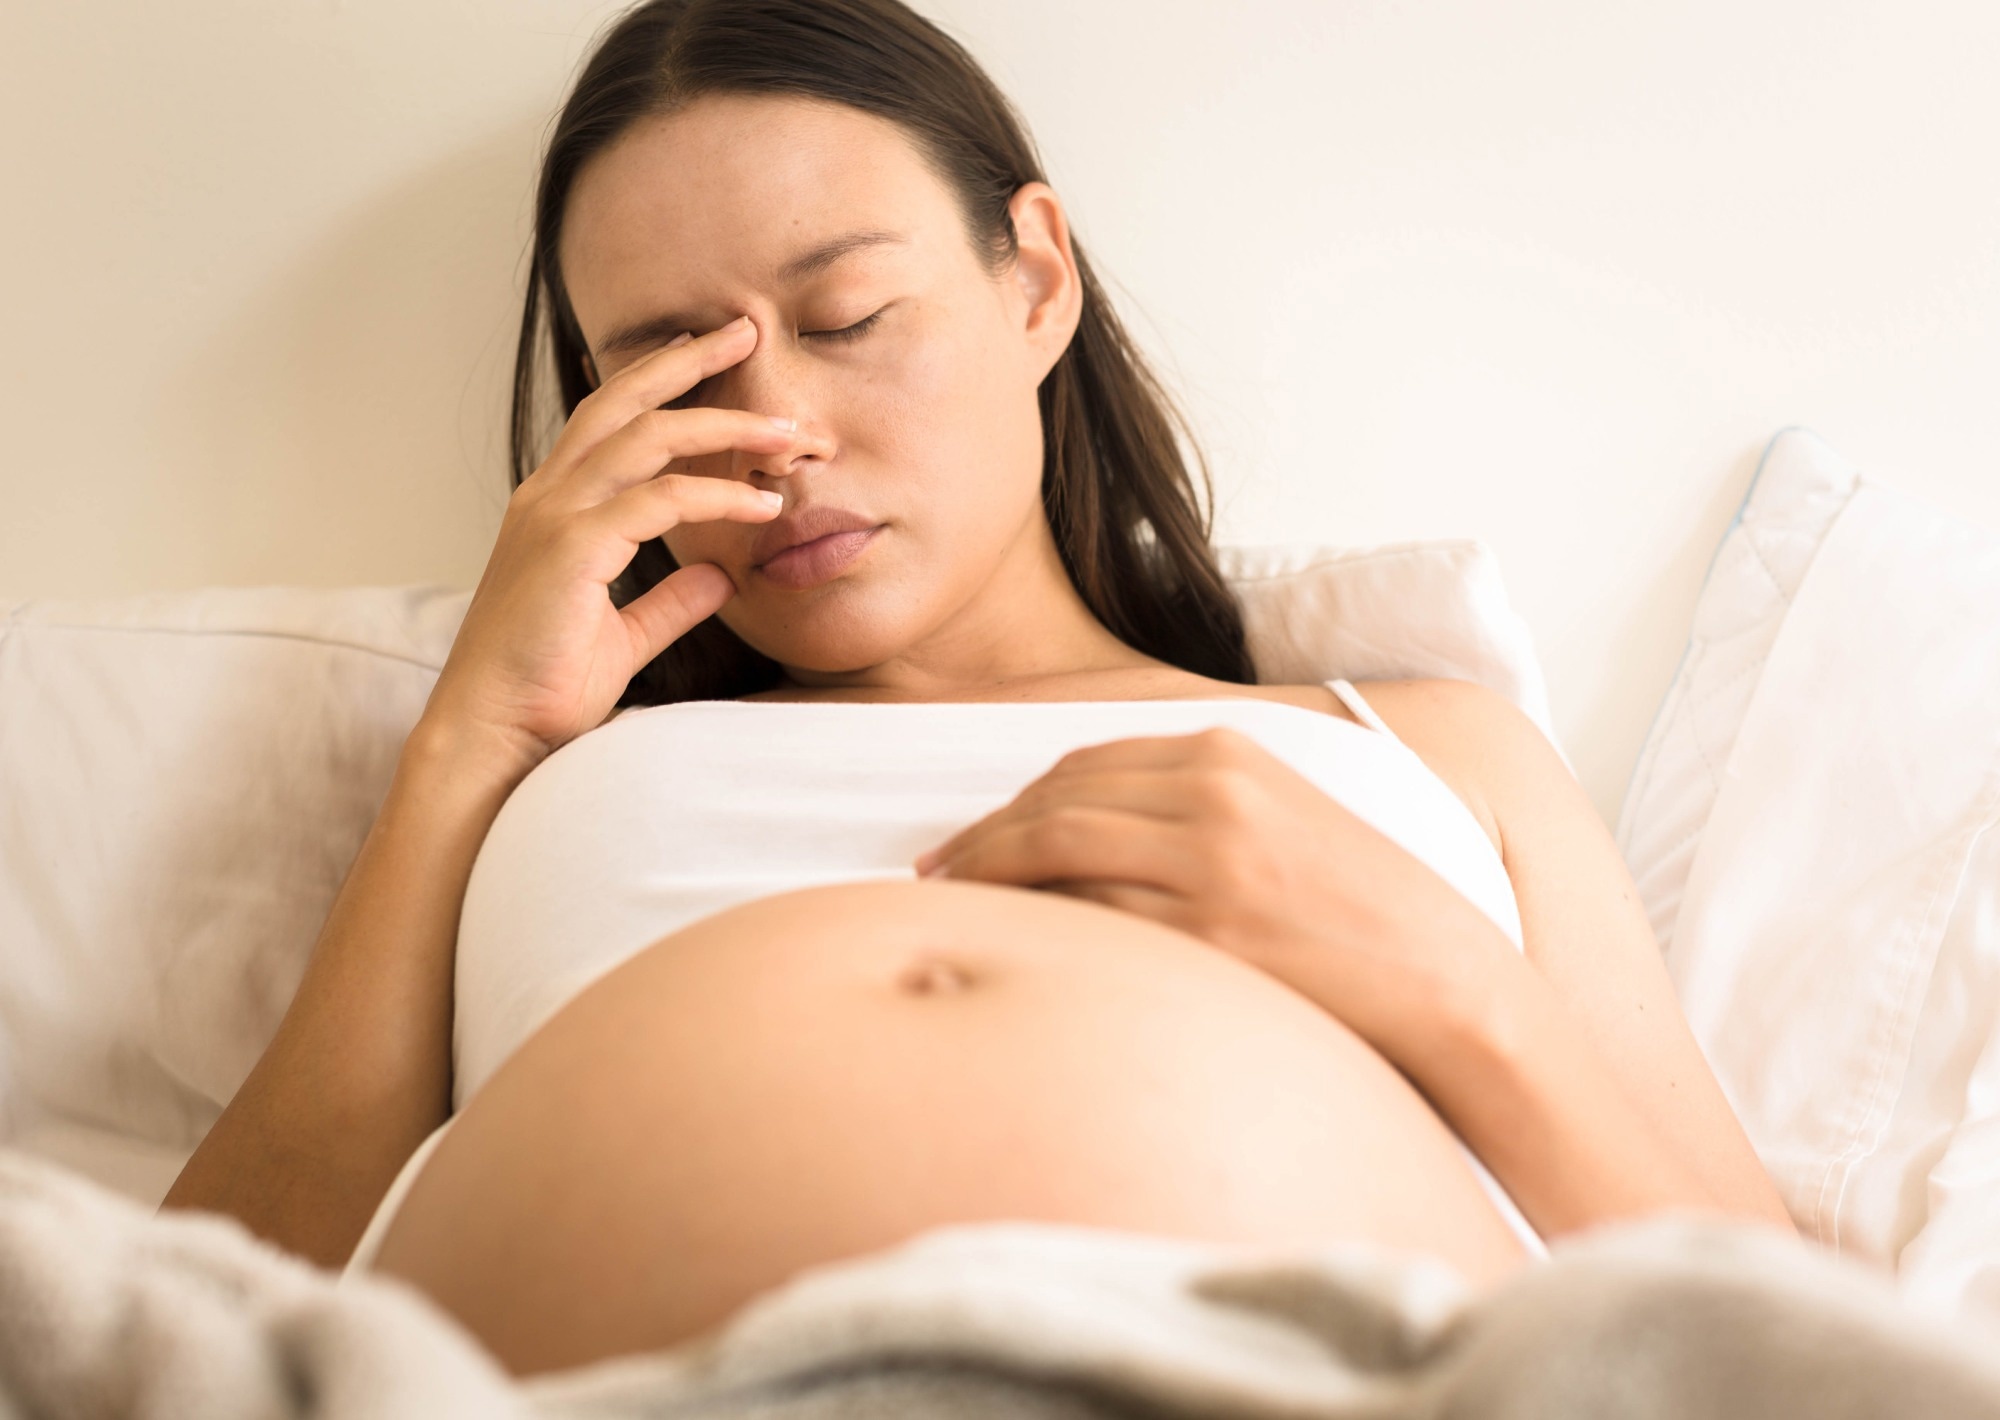 Study: GDF15 linked to maternal risk of nausea and vomiting during pregnancy. Image Credit: christinarosepix / Shutterstock